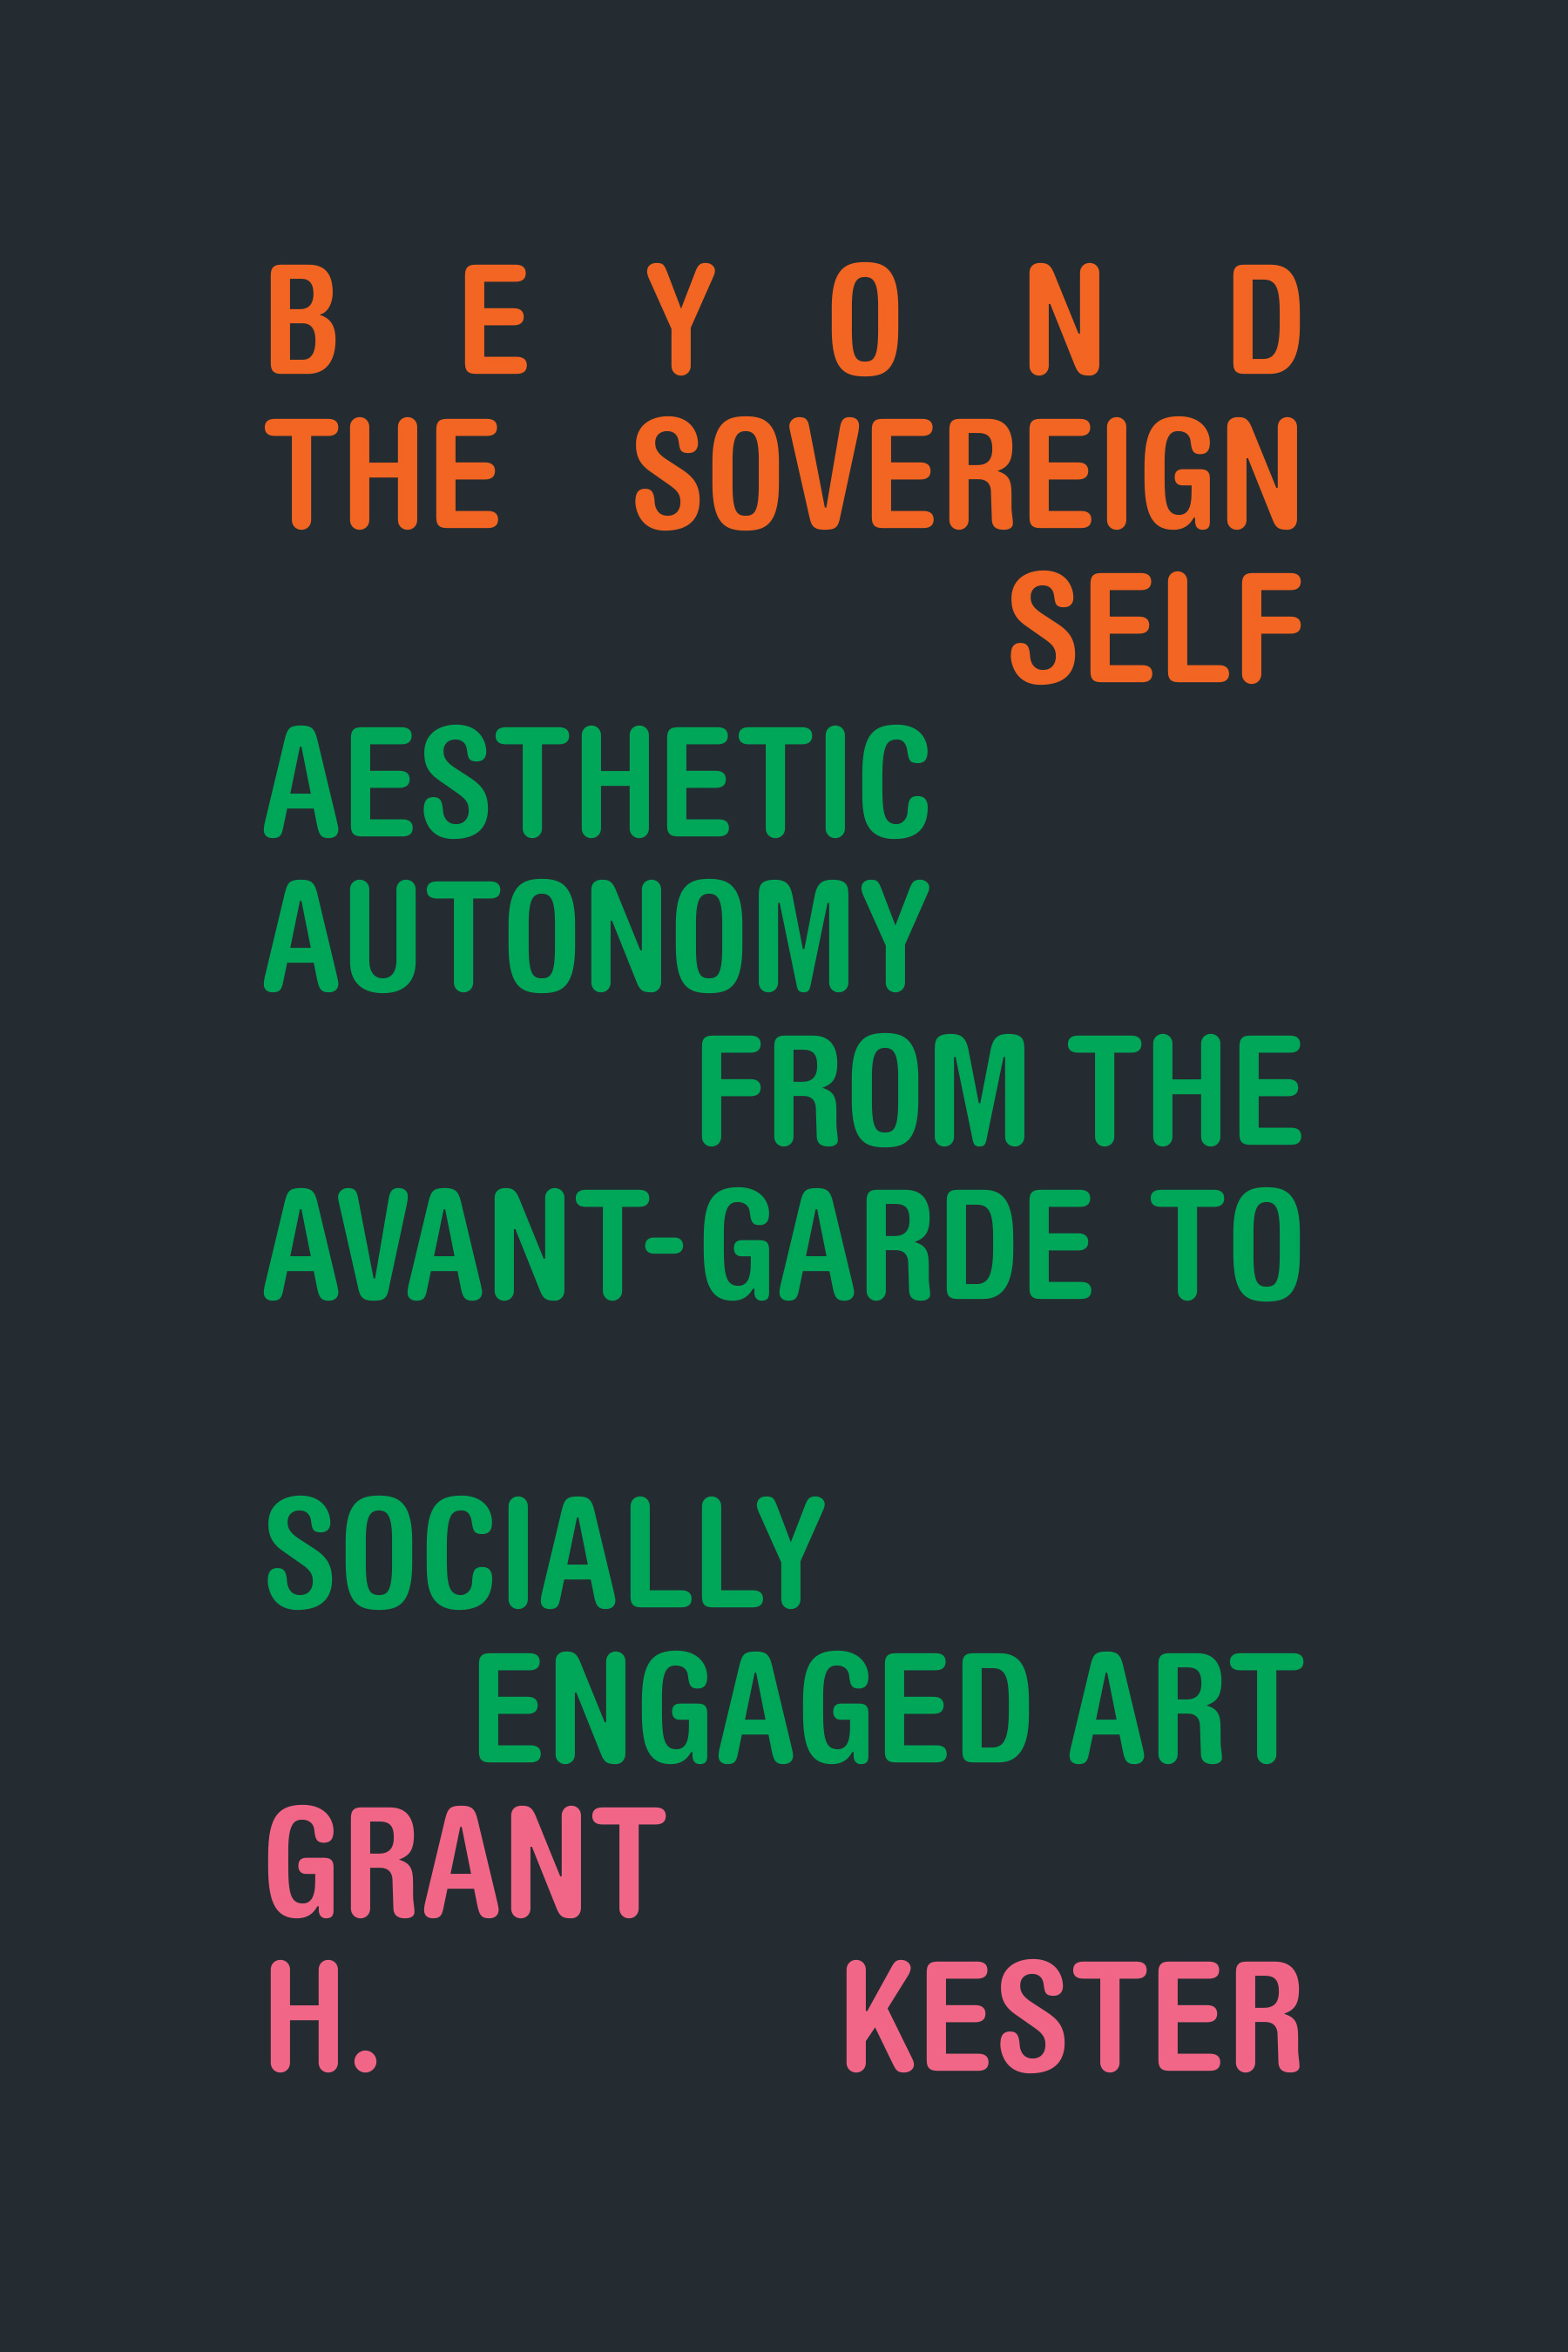 Cover of Beyond the Sovereign Self: Aesthetic Autonomy from the Avant-Garde to Socially Engaged Art by Grant H. Kester. Cover is a dark gray color, and the text of the title is centered, with Beyond the Sovereign Self in orange, Aesthetic Autonomy from the Avant-Garde to Socially Engaged Art in green, and Grant H. Kester in pink.